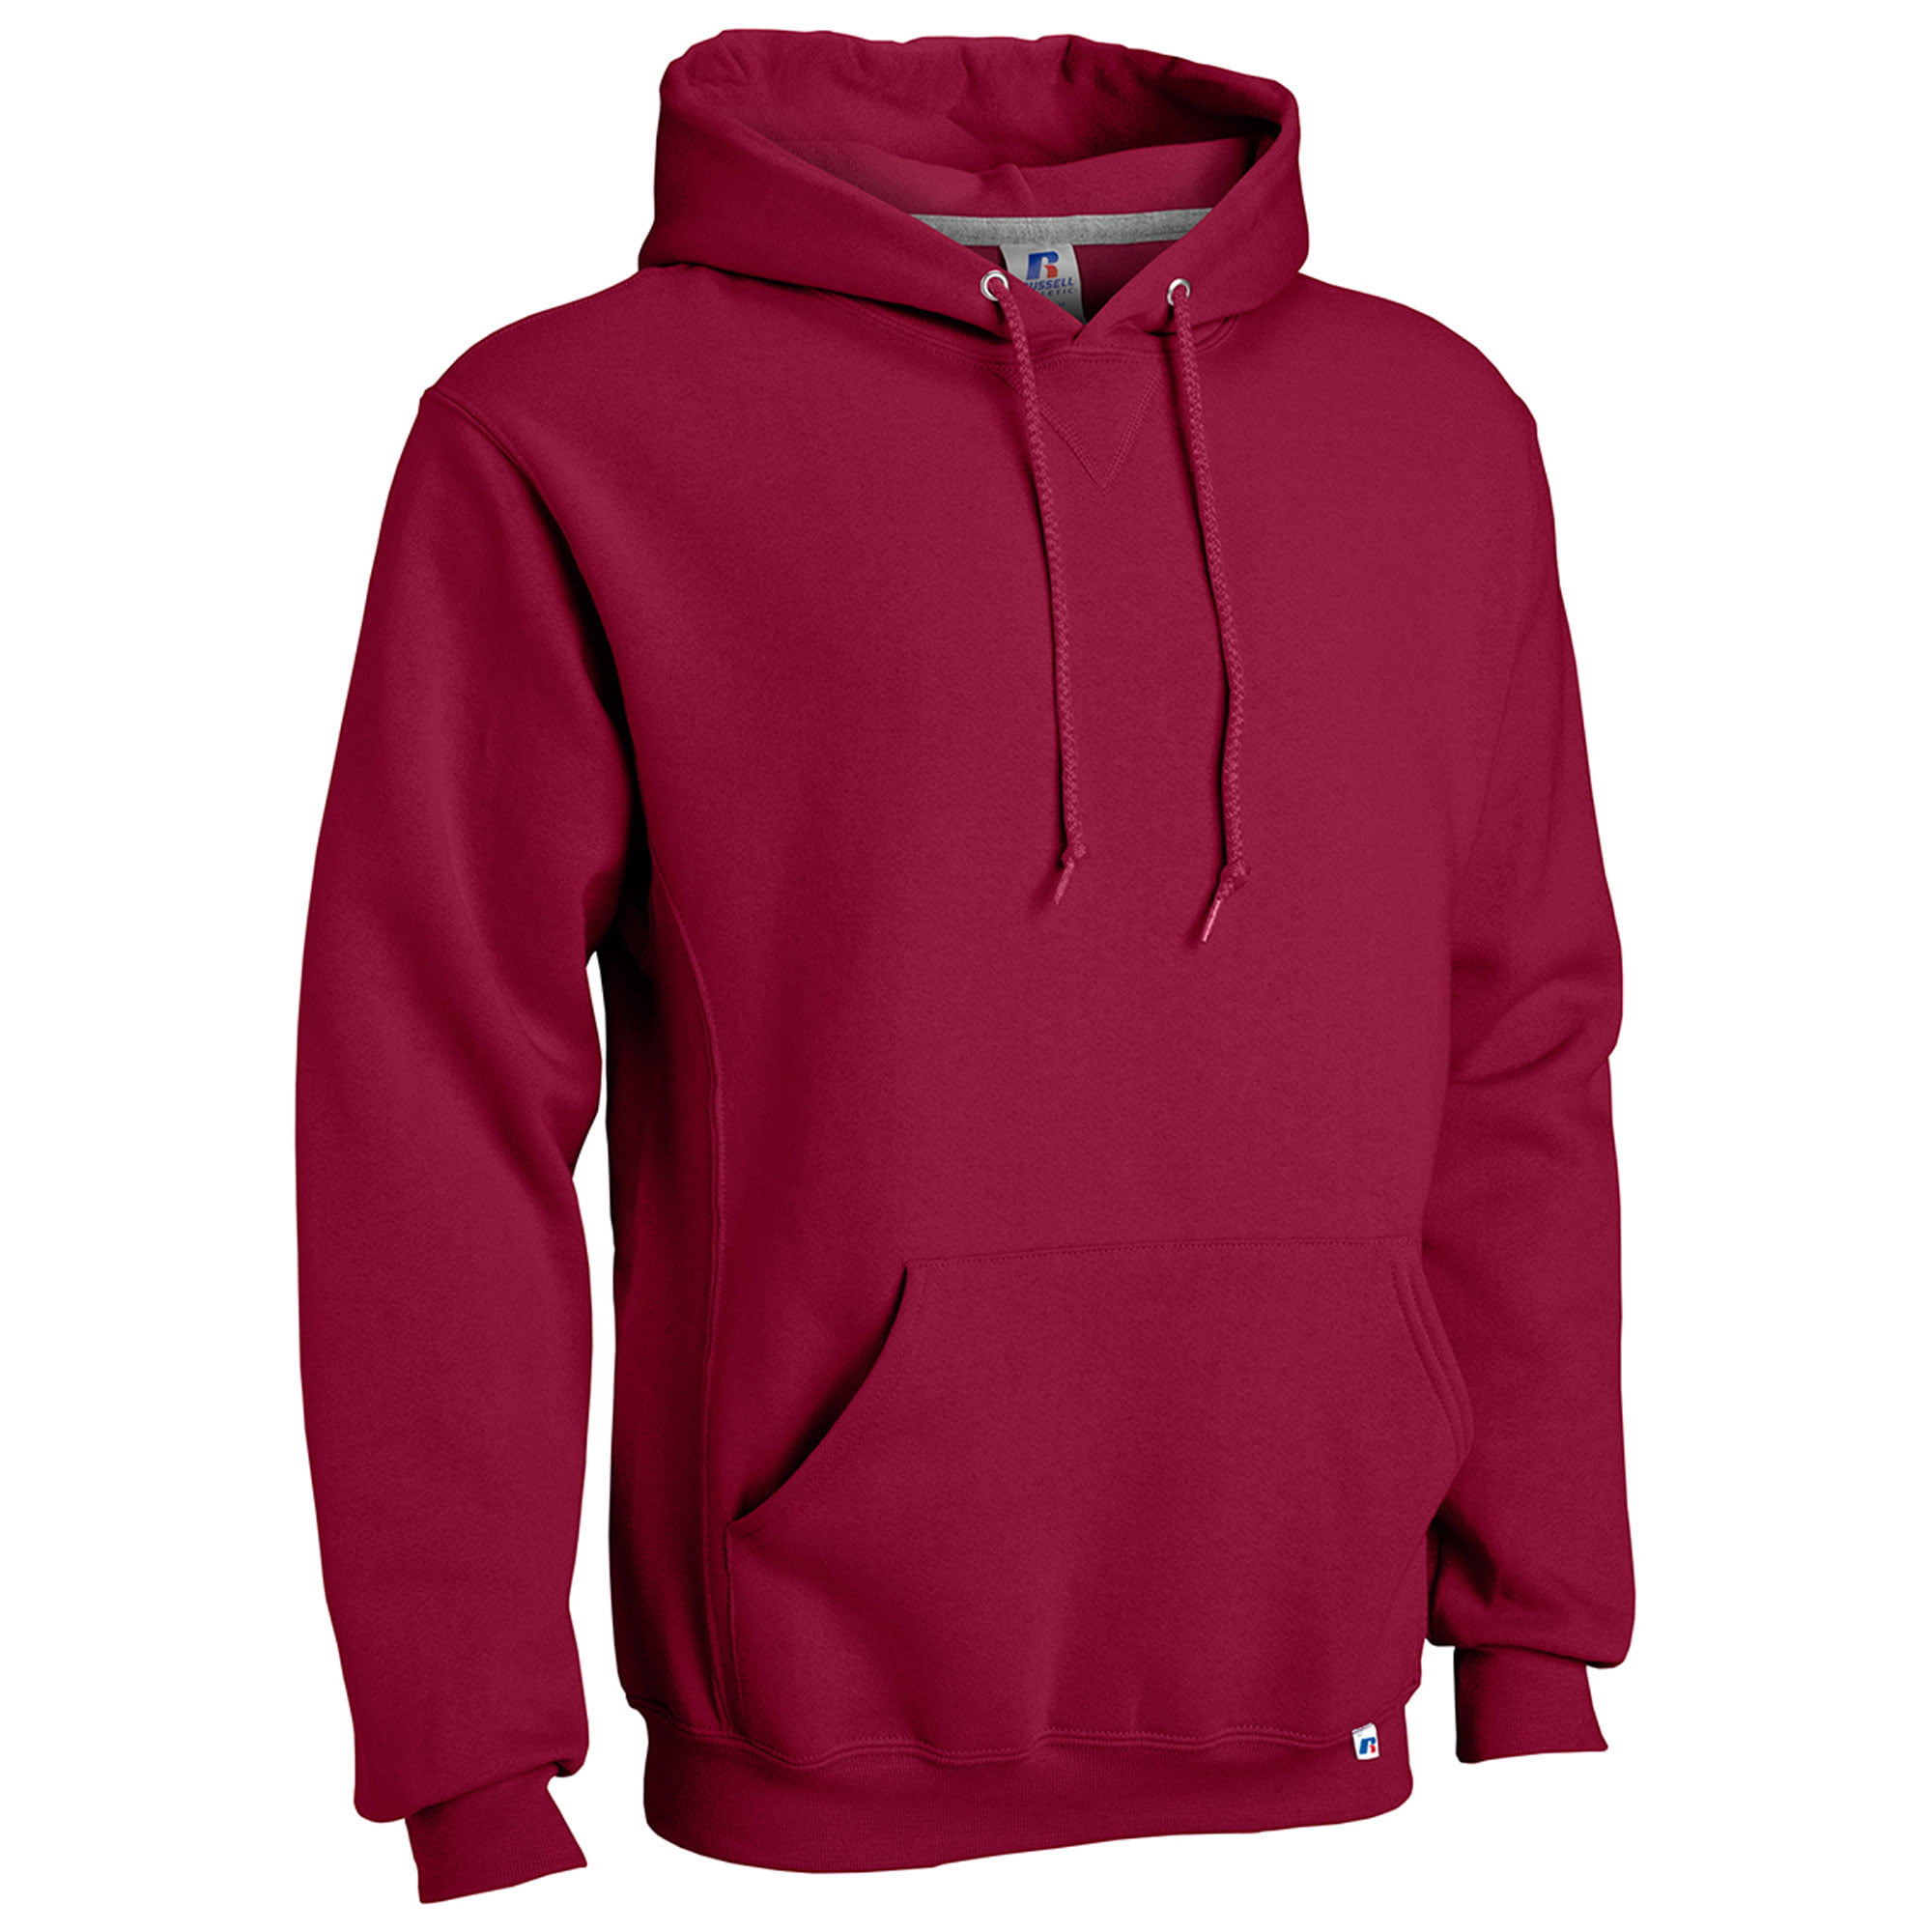 Russell Athletic - Russell Athletic Men's Dri-Power Fleece Pullover ...